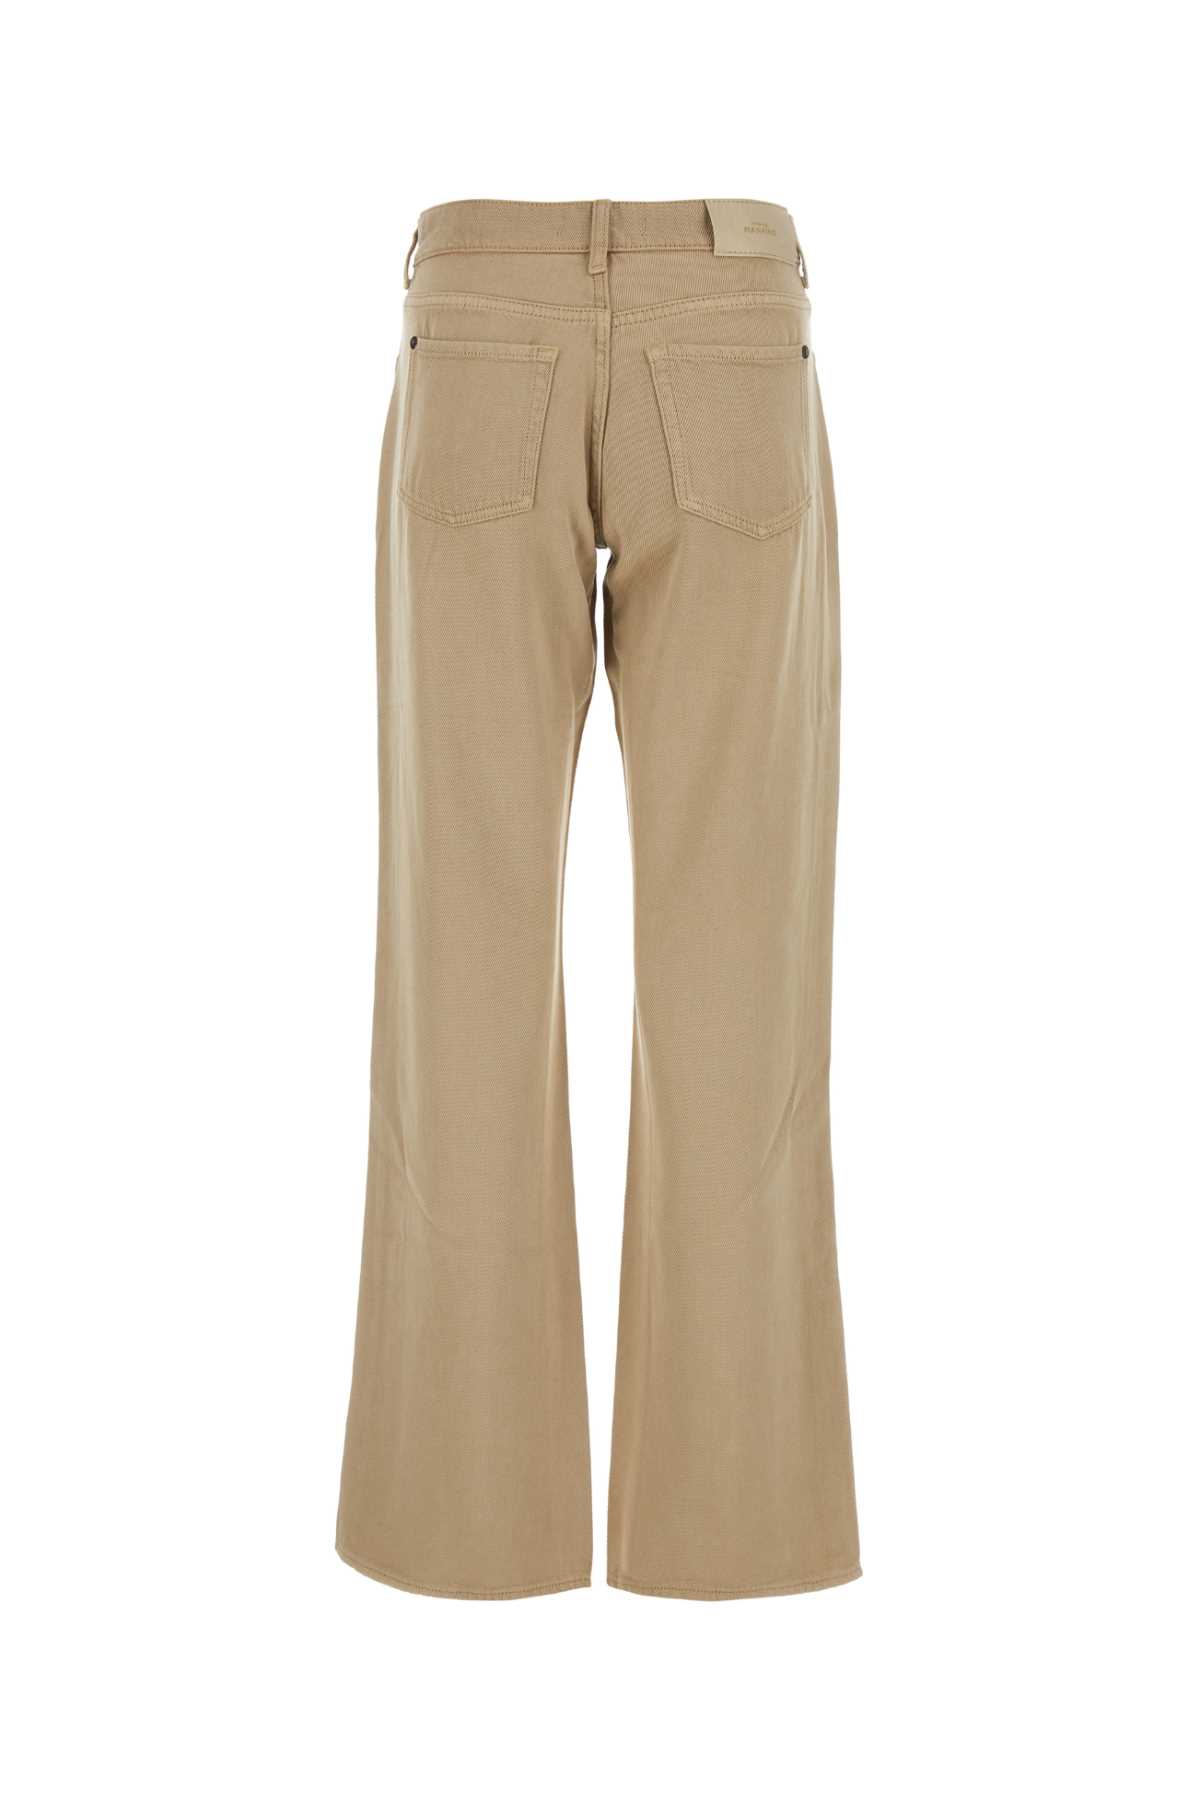 7 For All Mankind Camel Tencel Tess Pant In Beige